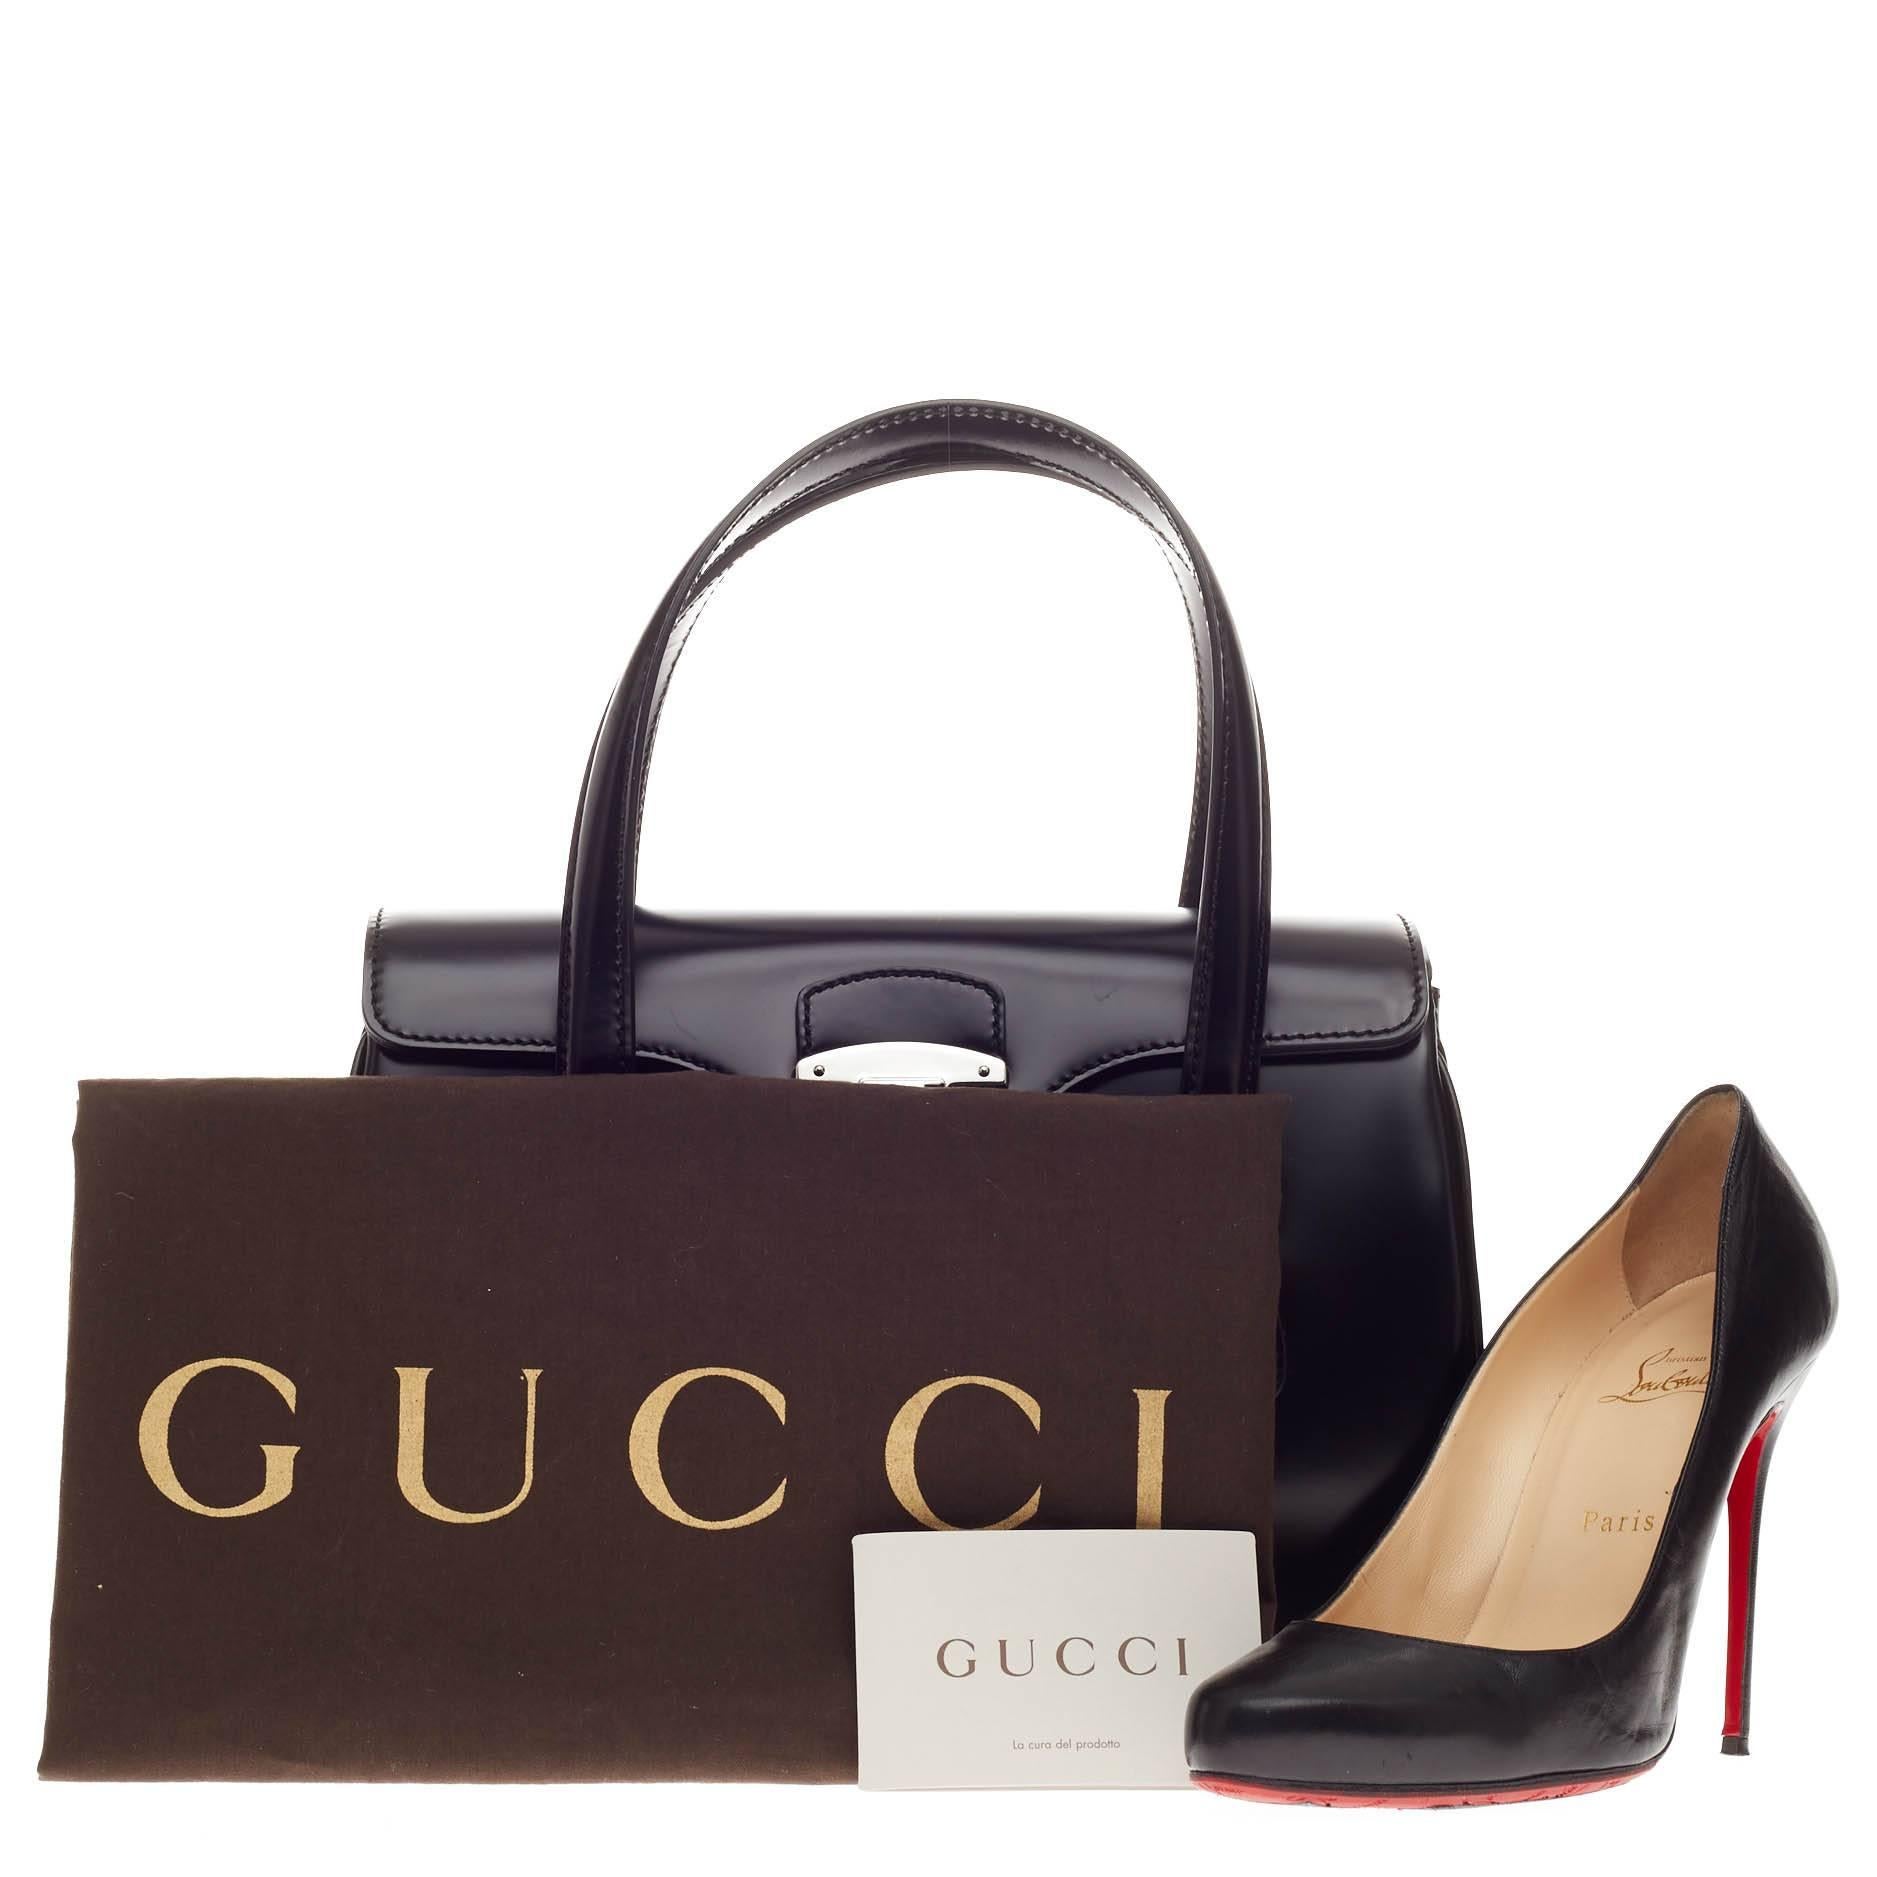 This authentic Gucci Lady Lock Satchel Leather Small is the perfect small accessory for work. Crafted in smooth and shiny black leather, this satchel features dual-top handle, retro-style lady lock closure, frontal flap, leather clochette and